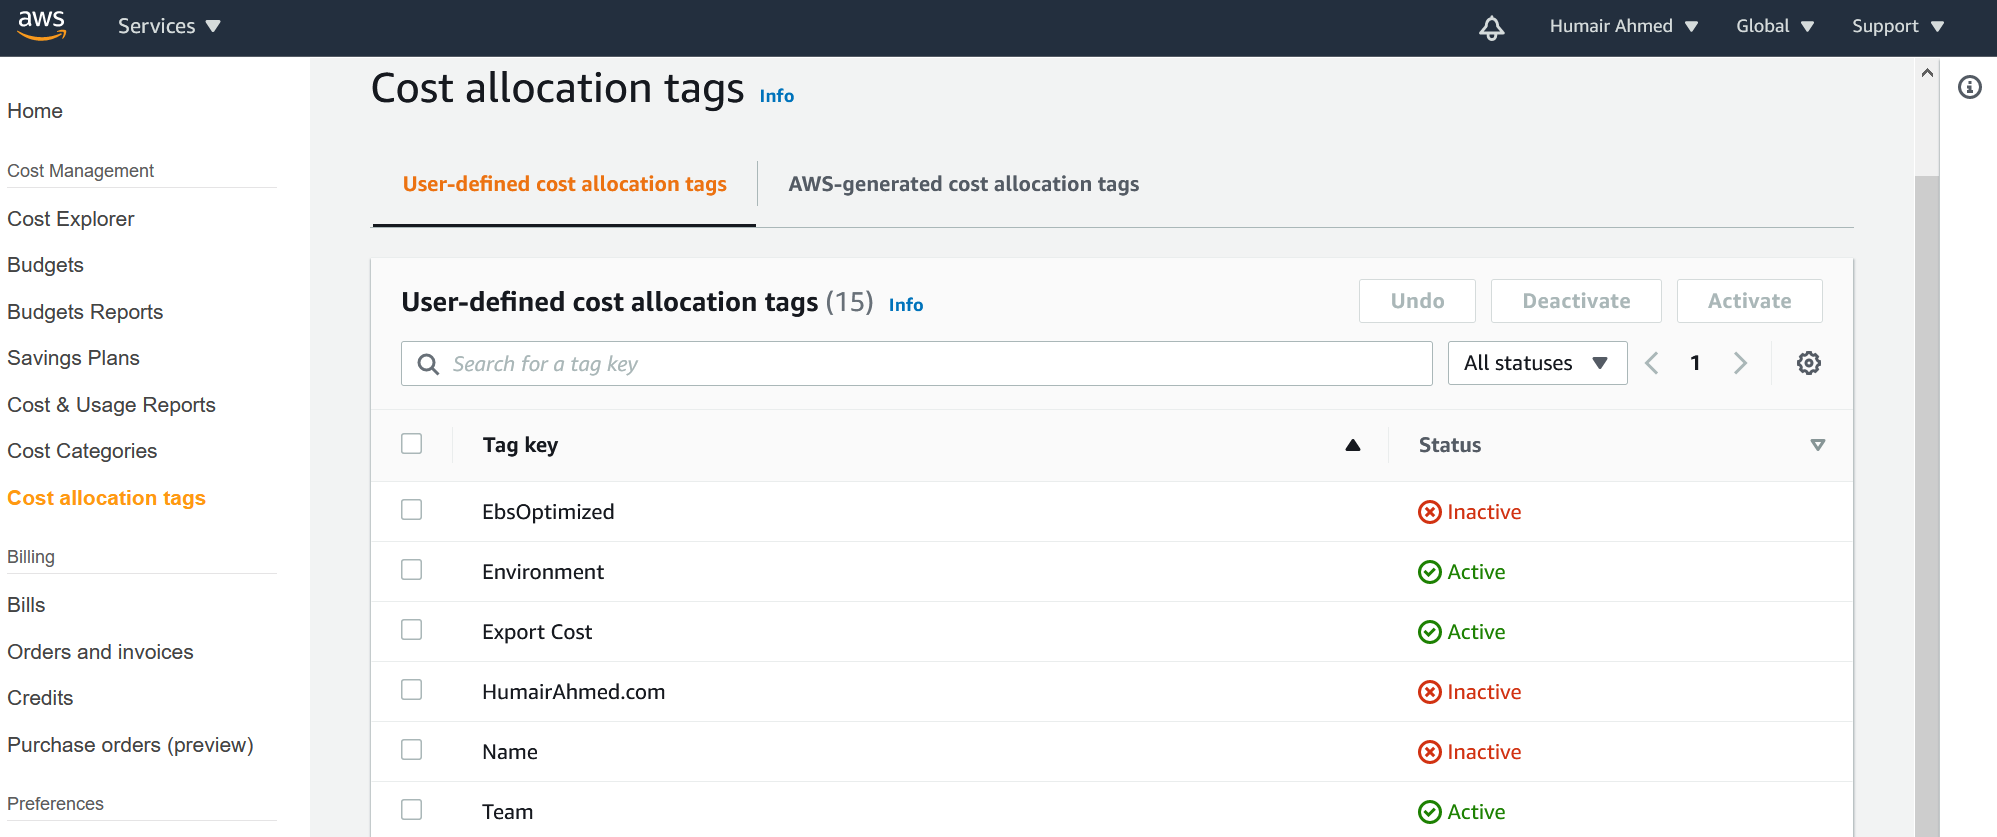 AWS - Activated 'Team' Cost Allocation Tag